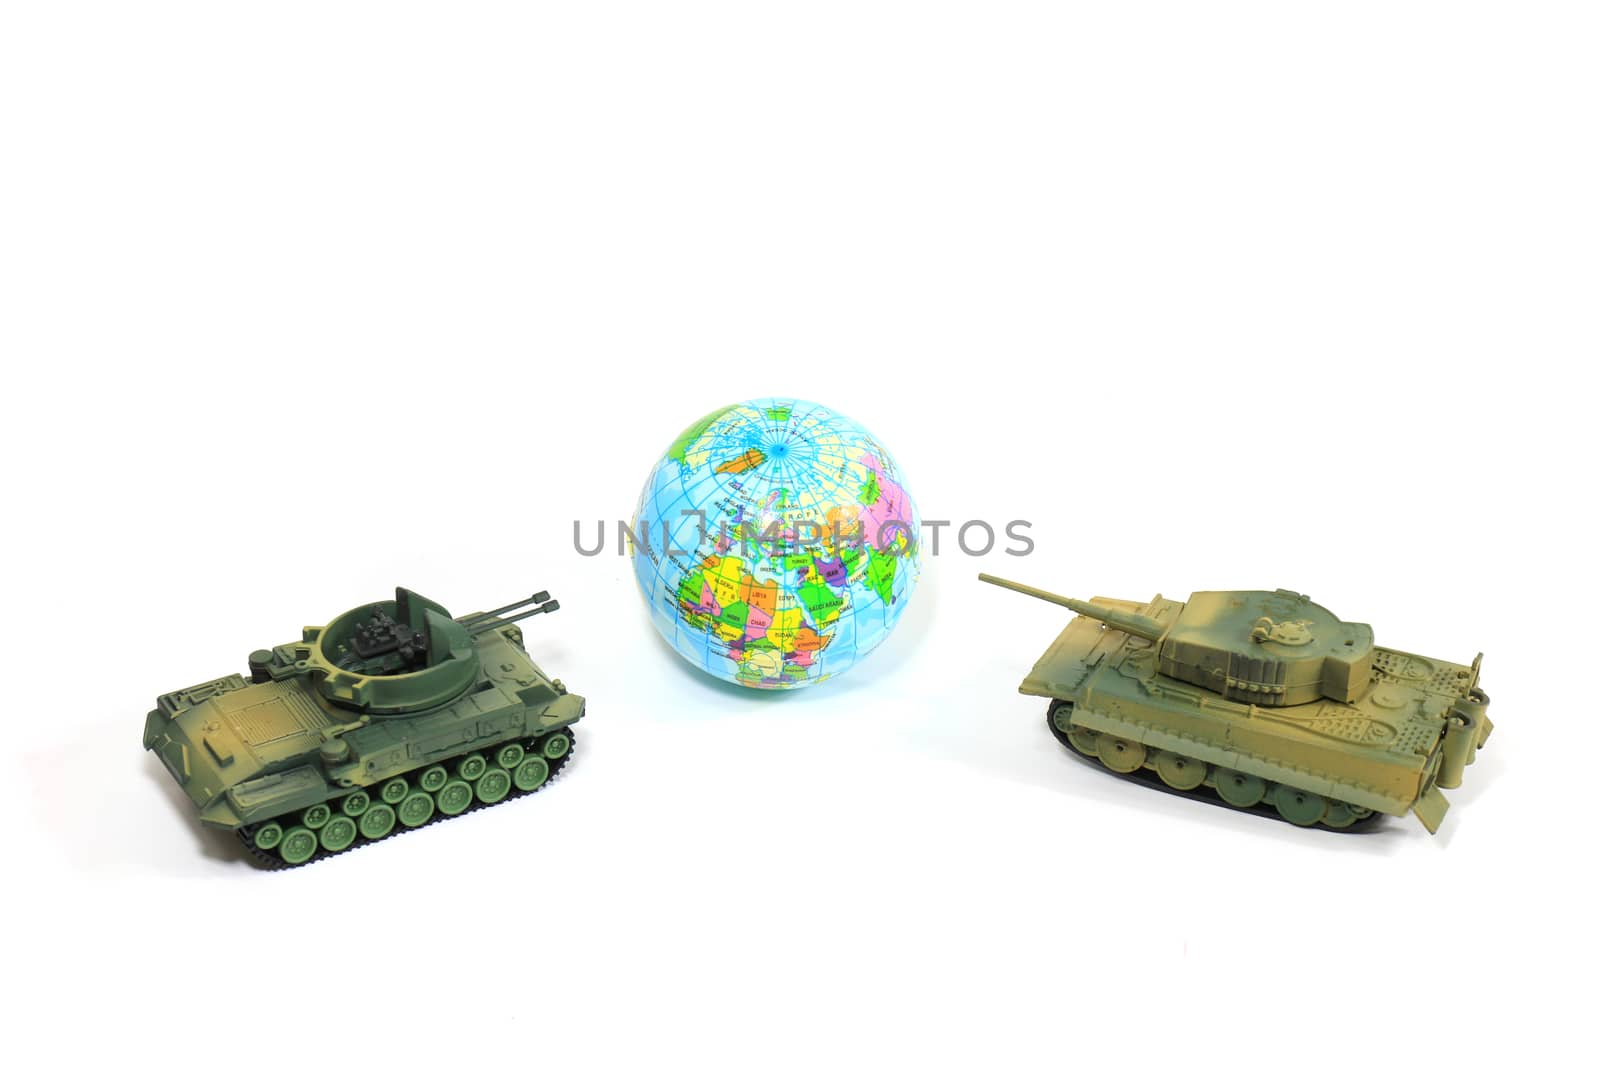 Toys Tank plastic as World War on white background, War, fight army soldier tank Sample picture or War scenario concept by cgdeaw